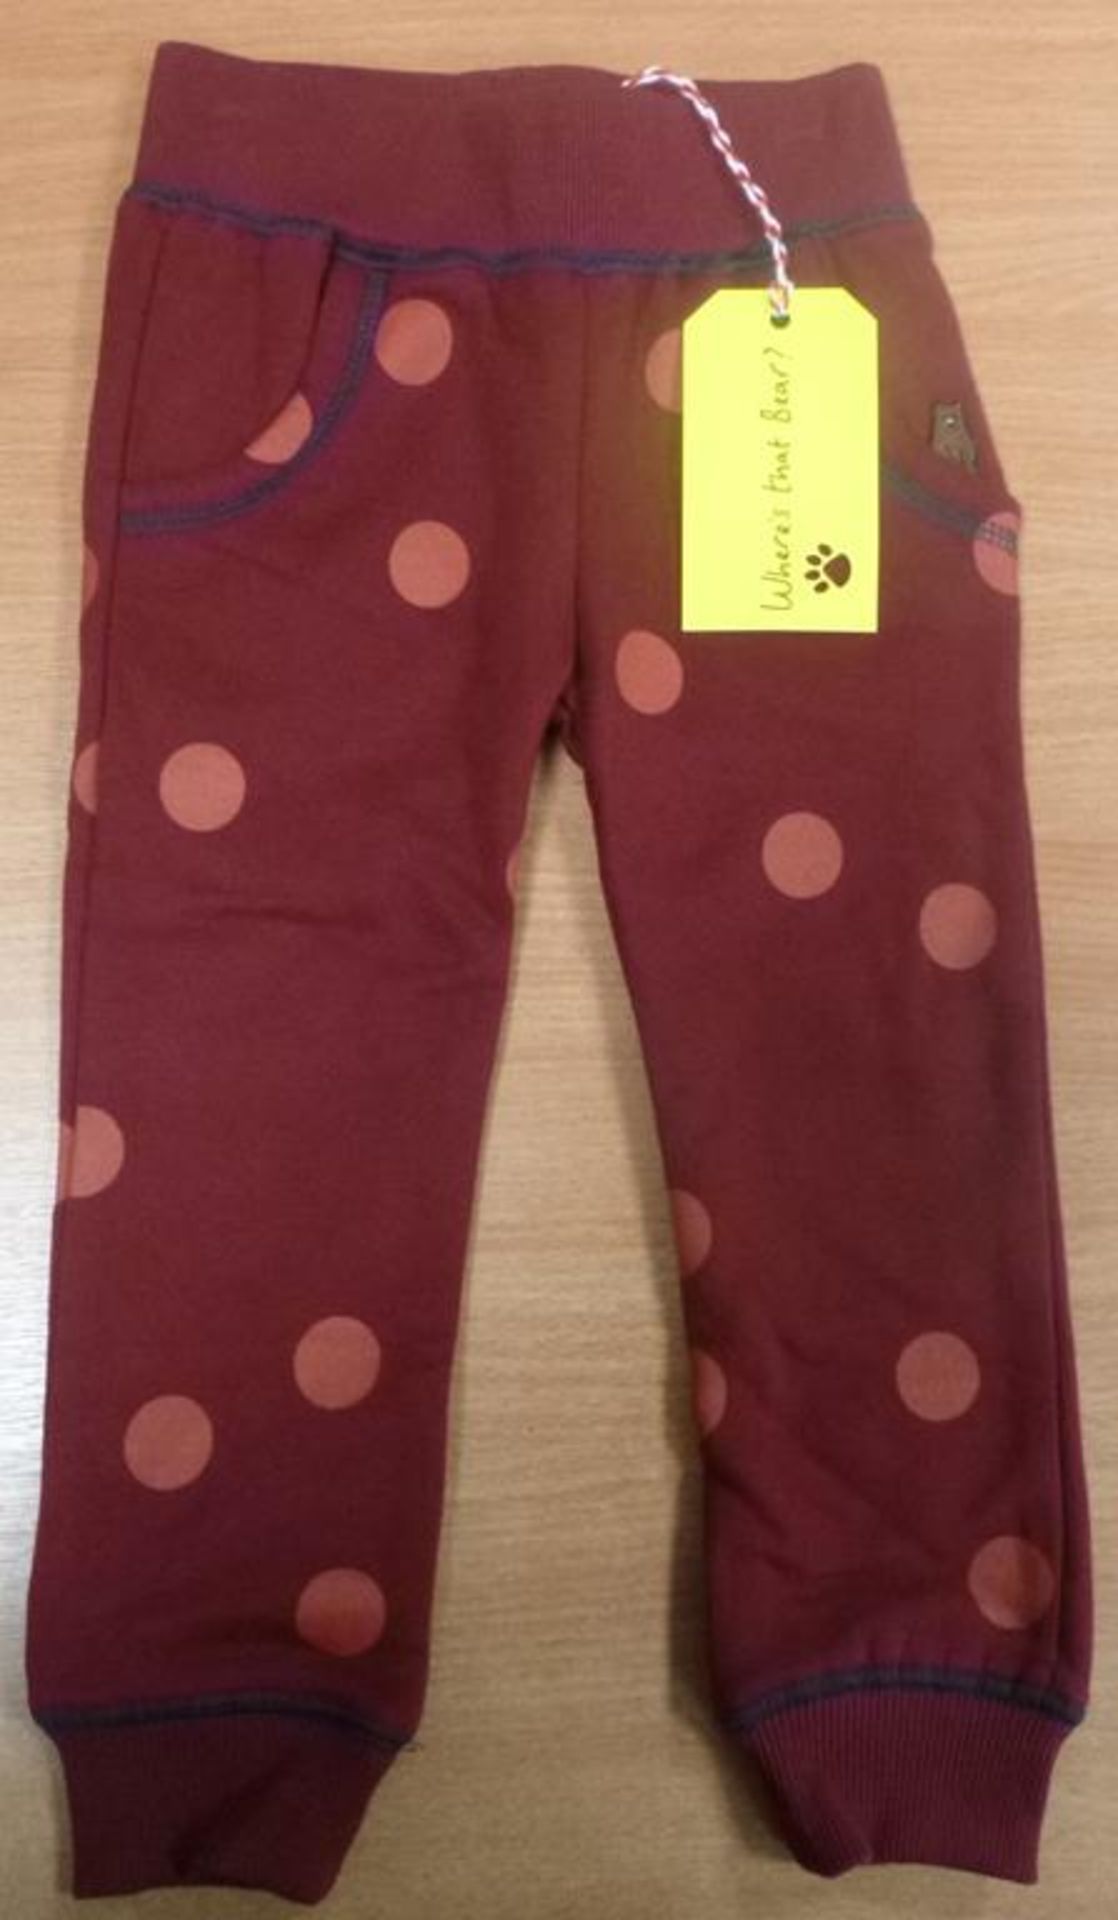 A quantity of Joggers in Dark Berry by 'Where's that Bear' and 6 x Matching Sweaters, sizes 1-2yrs - - Image 3 of 3